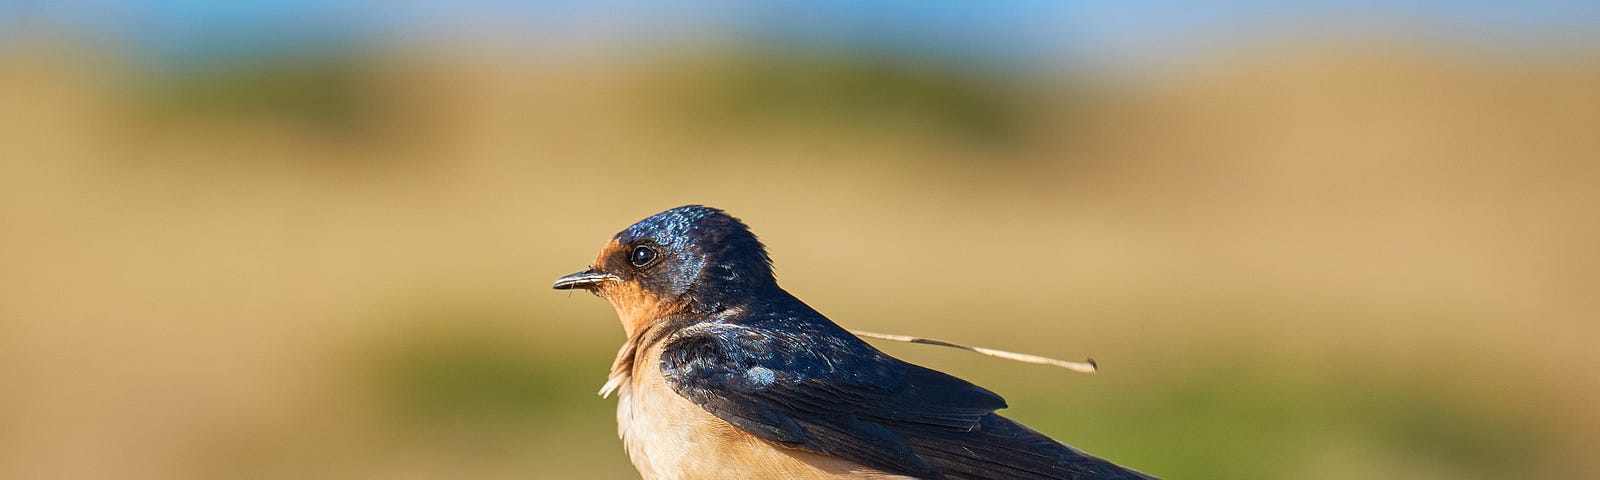 Original photograph of a colorful beautiful barn swallow perched on a rusty metal pyramid post on a sunny day outside on a coastal California hillside carrying straw to build a nest.